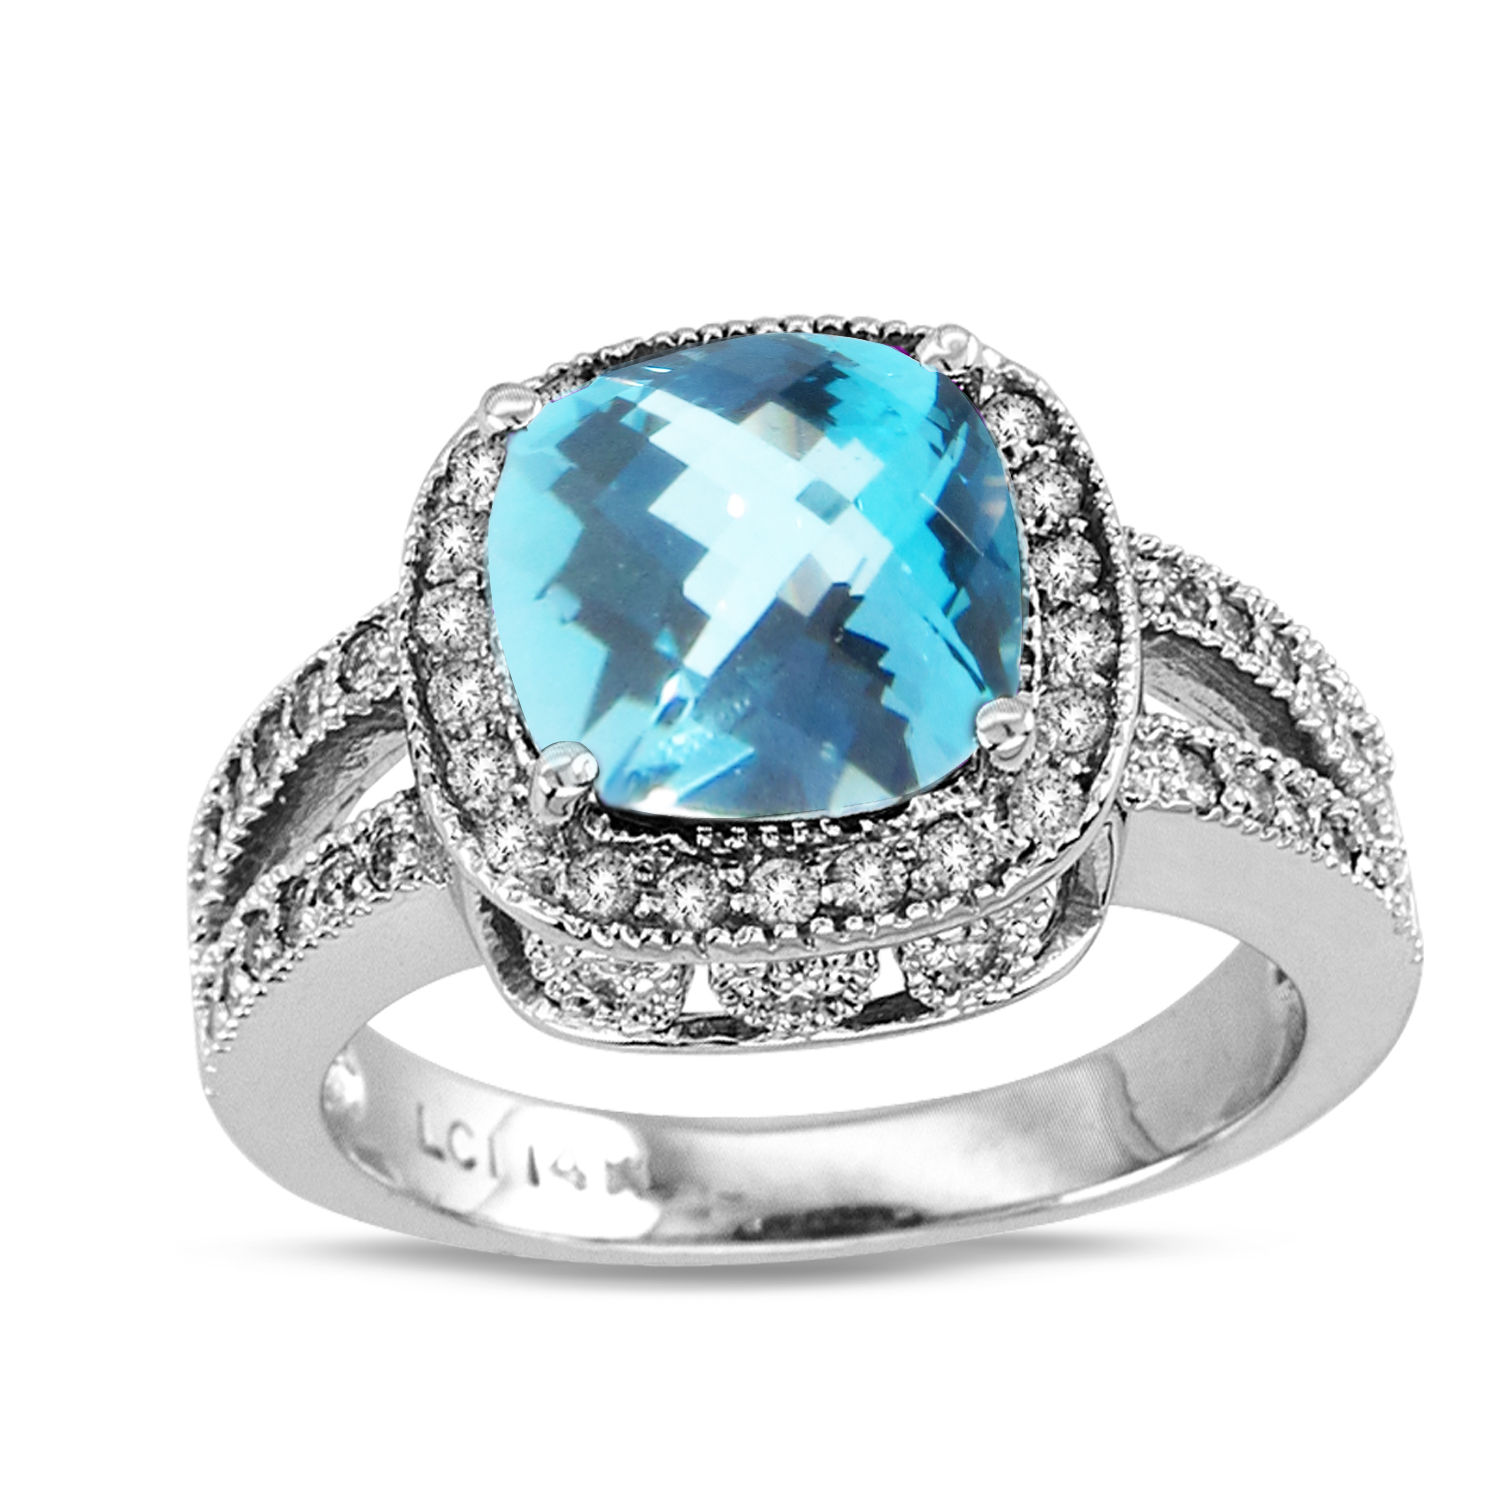 View 14k Gold Split Shank Ring with 0.50ct tw of Round Diamonds and 9mm Cushion Cut Checkerboard Cut Blue Topaz Center Stone